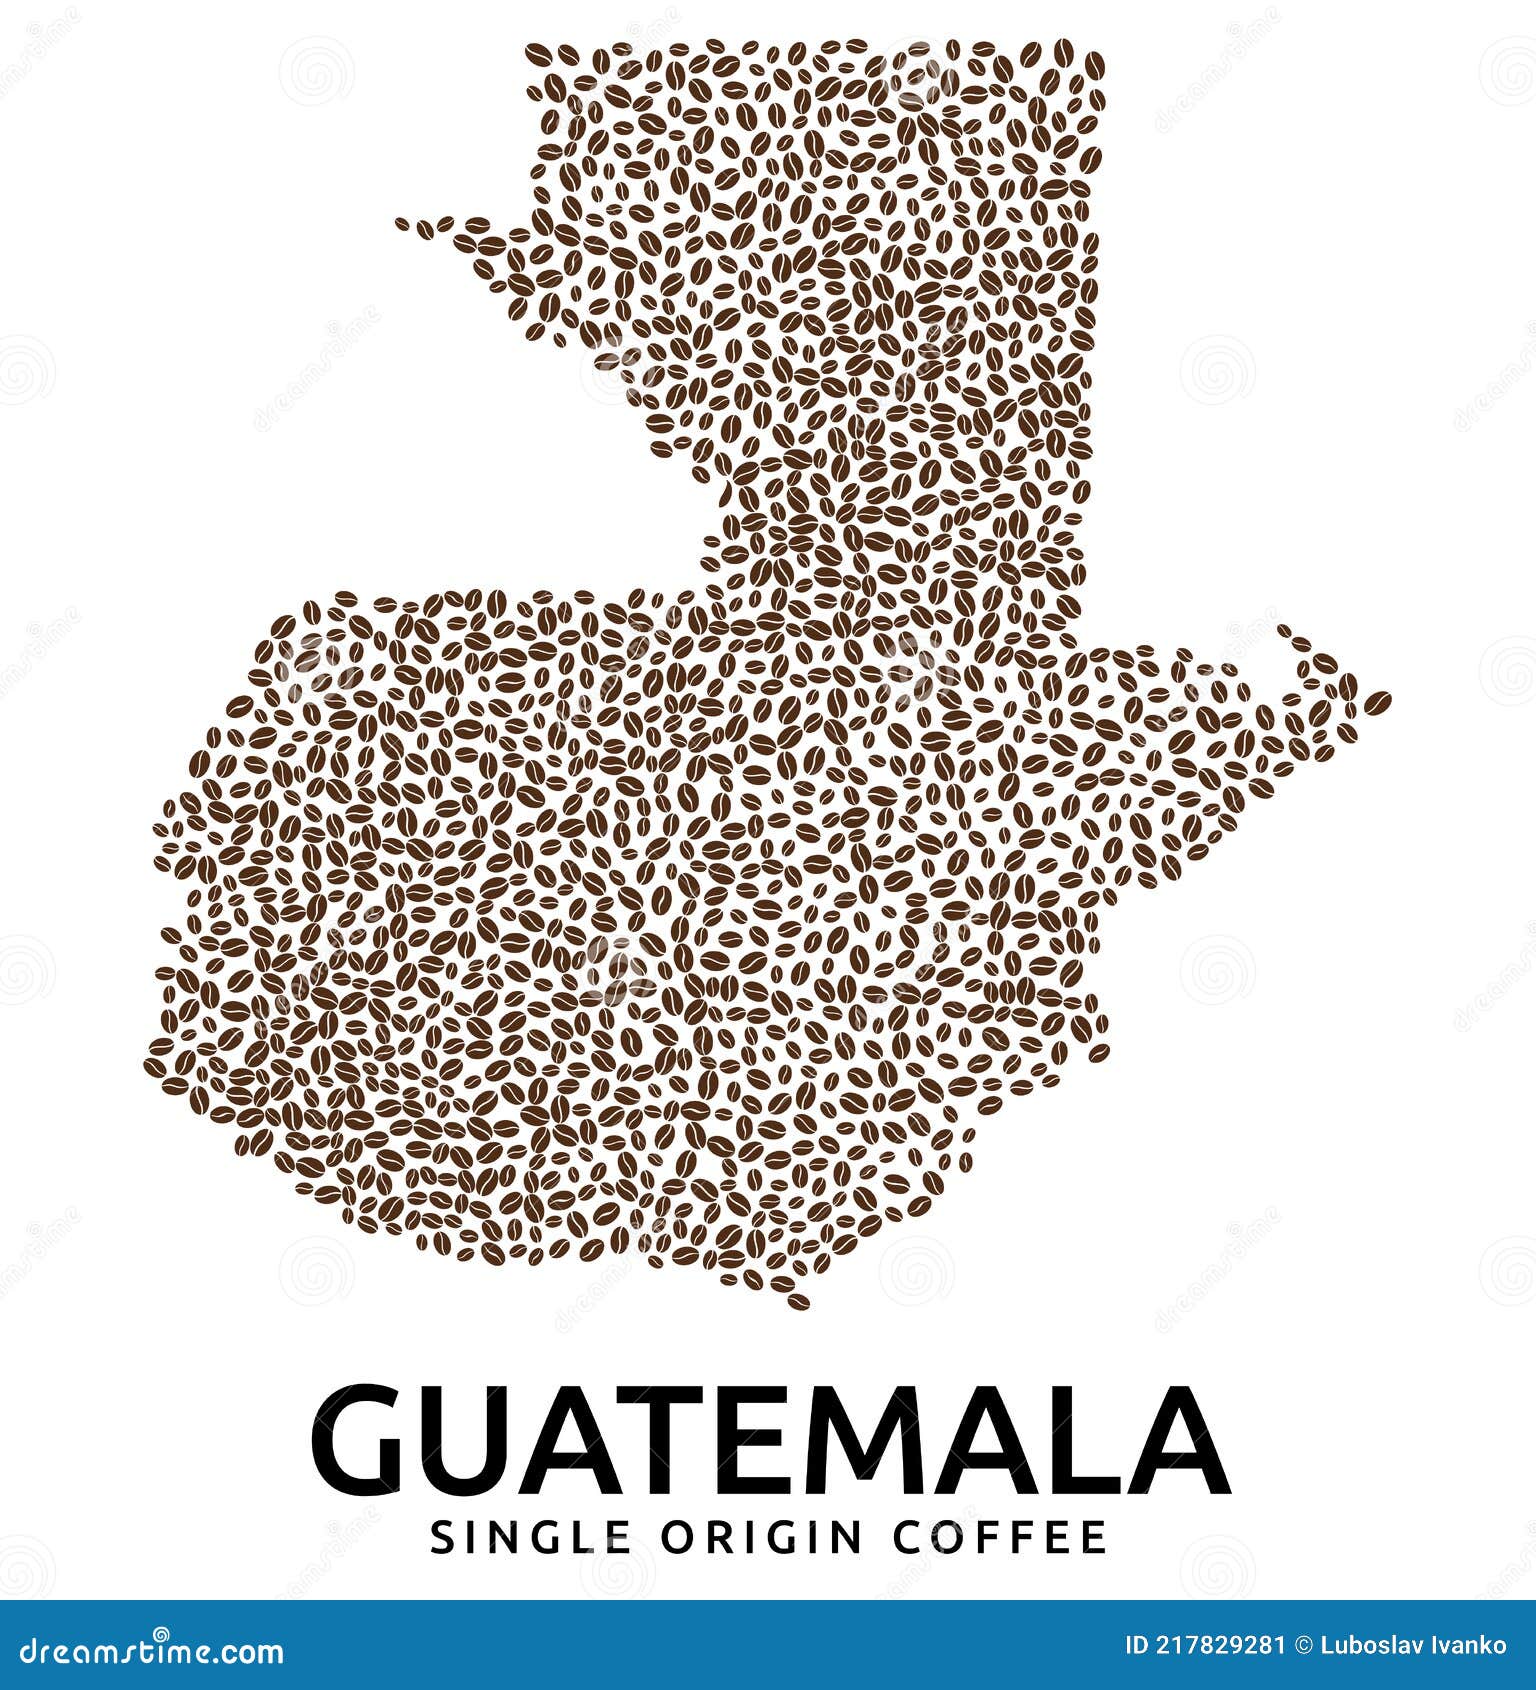  of guatemala map made of scattered coffee beans, country name below